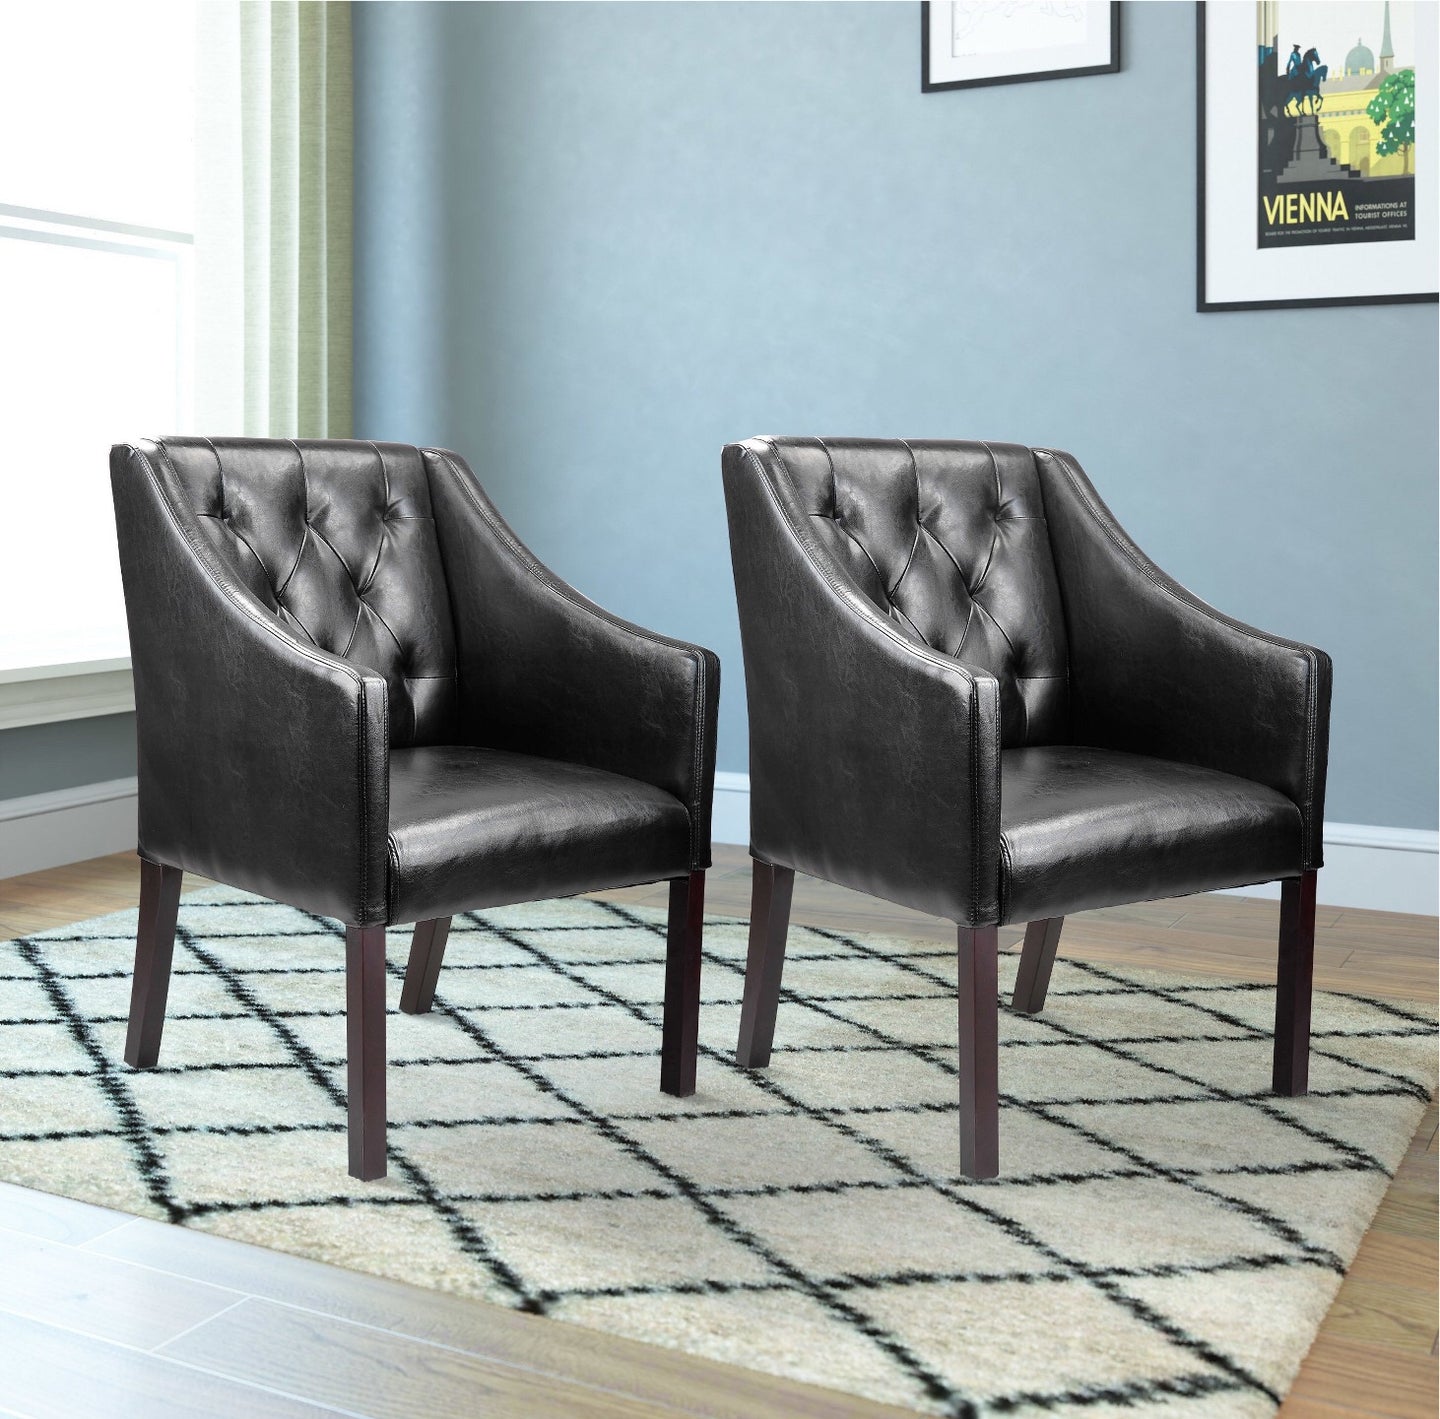 Corliving Antonio Club Chair in Black Bonded Leather set of 2 #4146